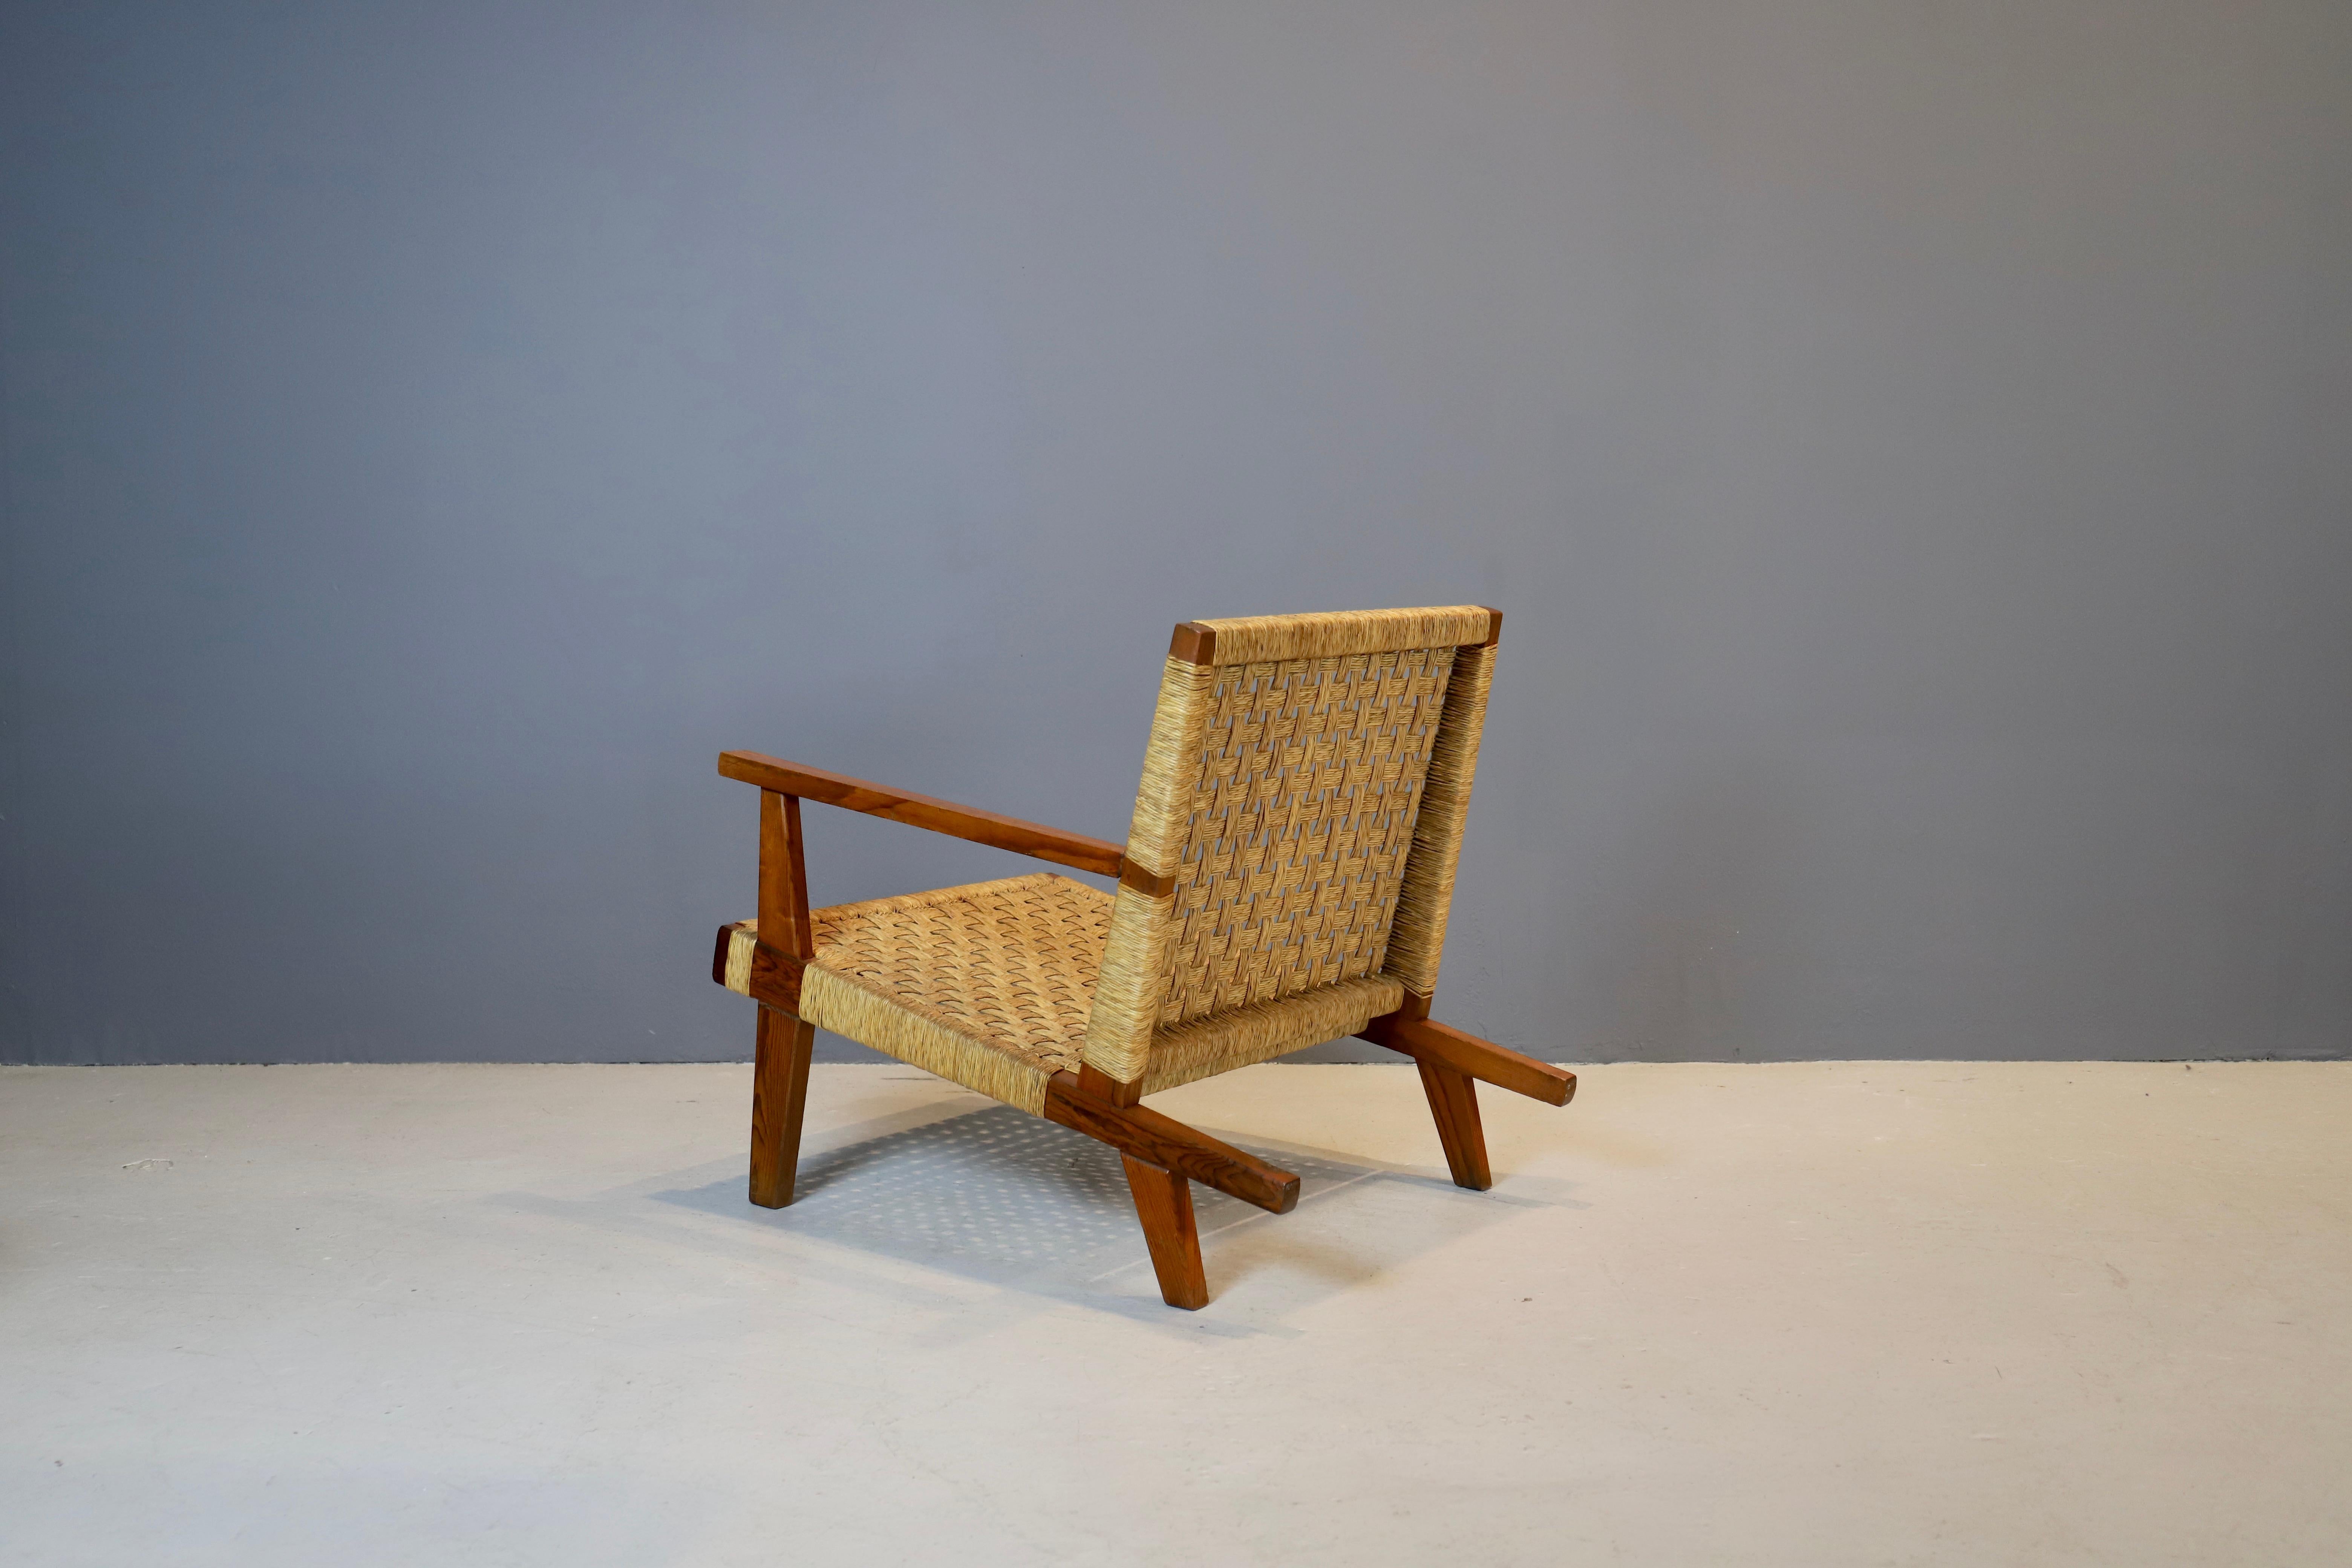 Rare single arm lounge chair by Michael Van Beuren, for Muebles, Mexico,
1940s. Original handwoven rush seat and back on solid oak frame.
Chair has been cleaned and all loose joints re-glued.